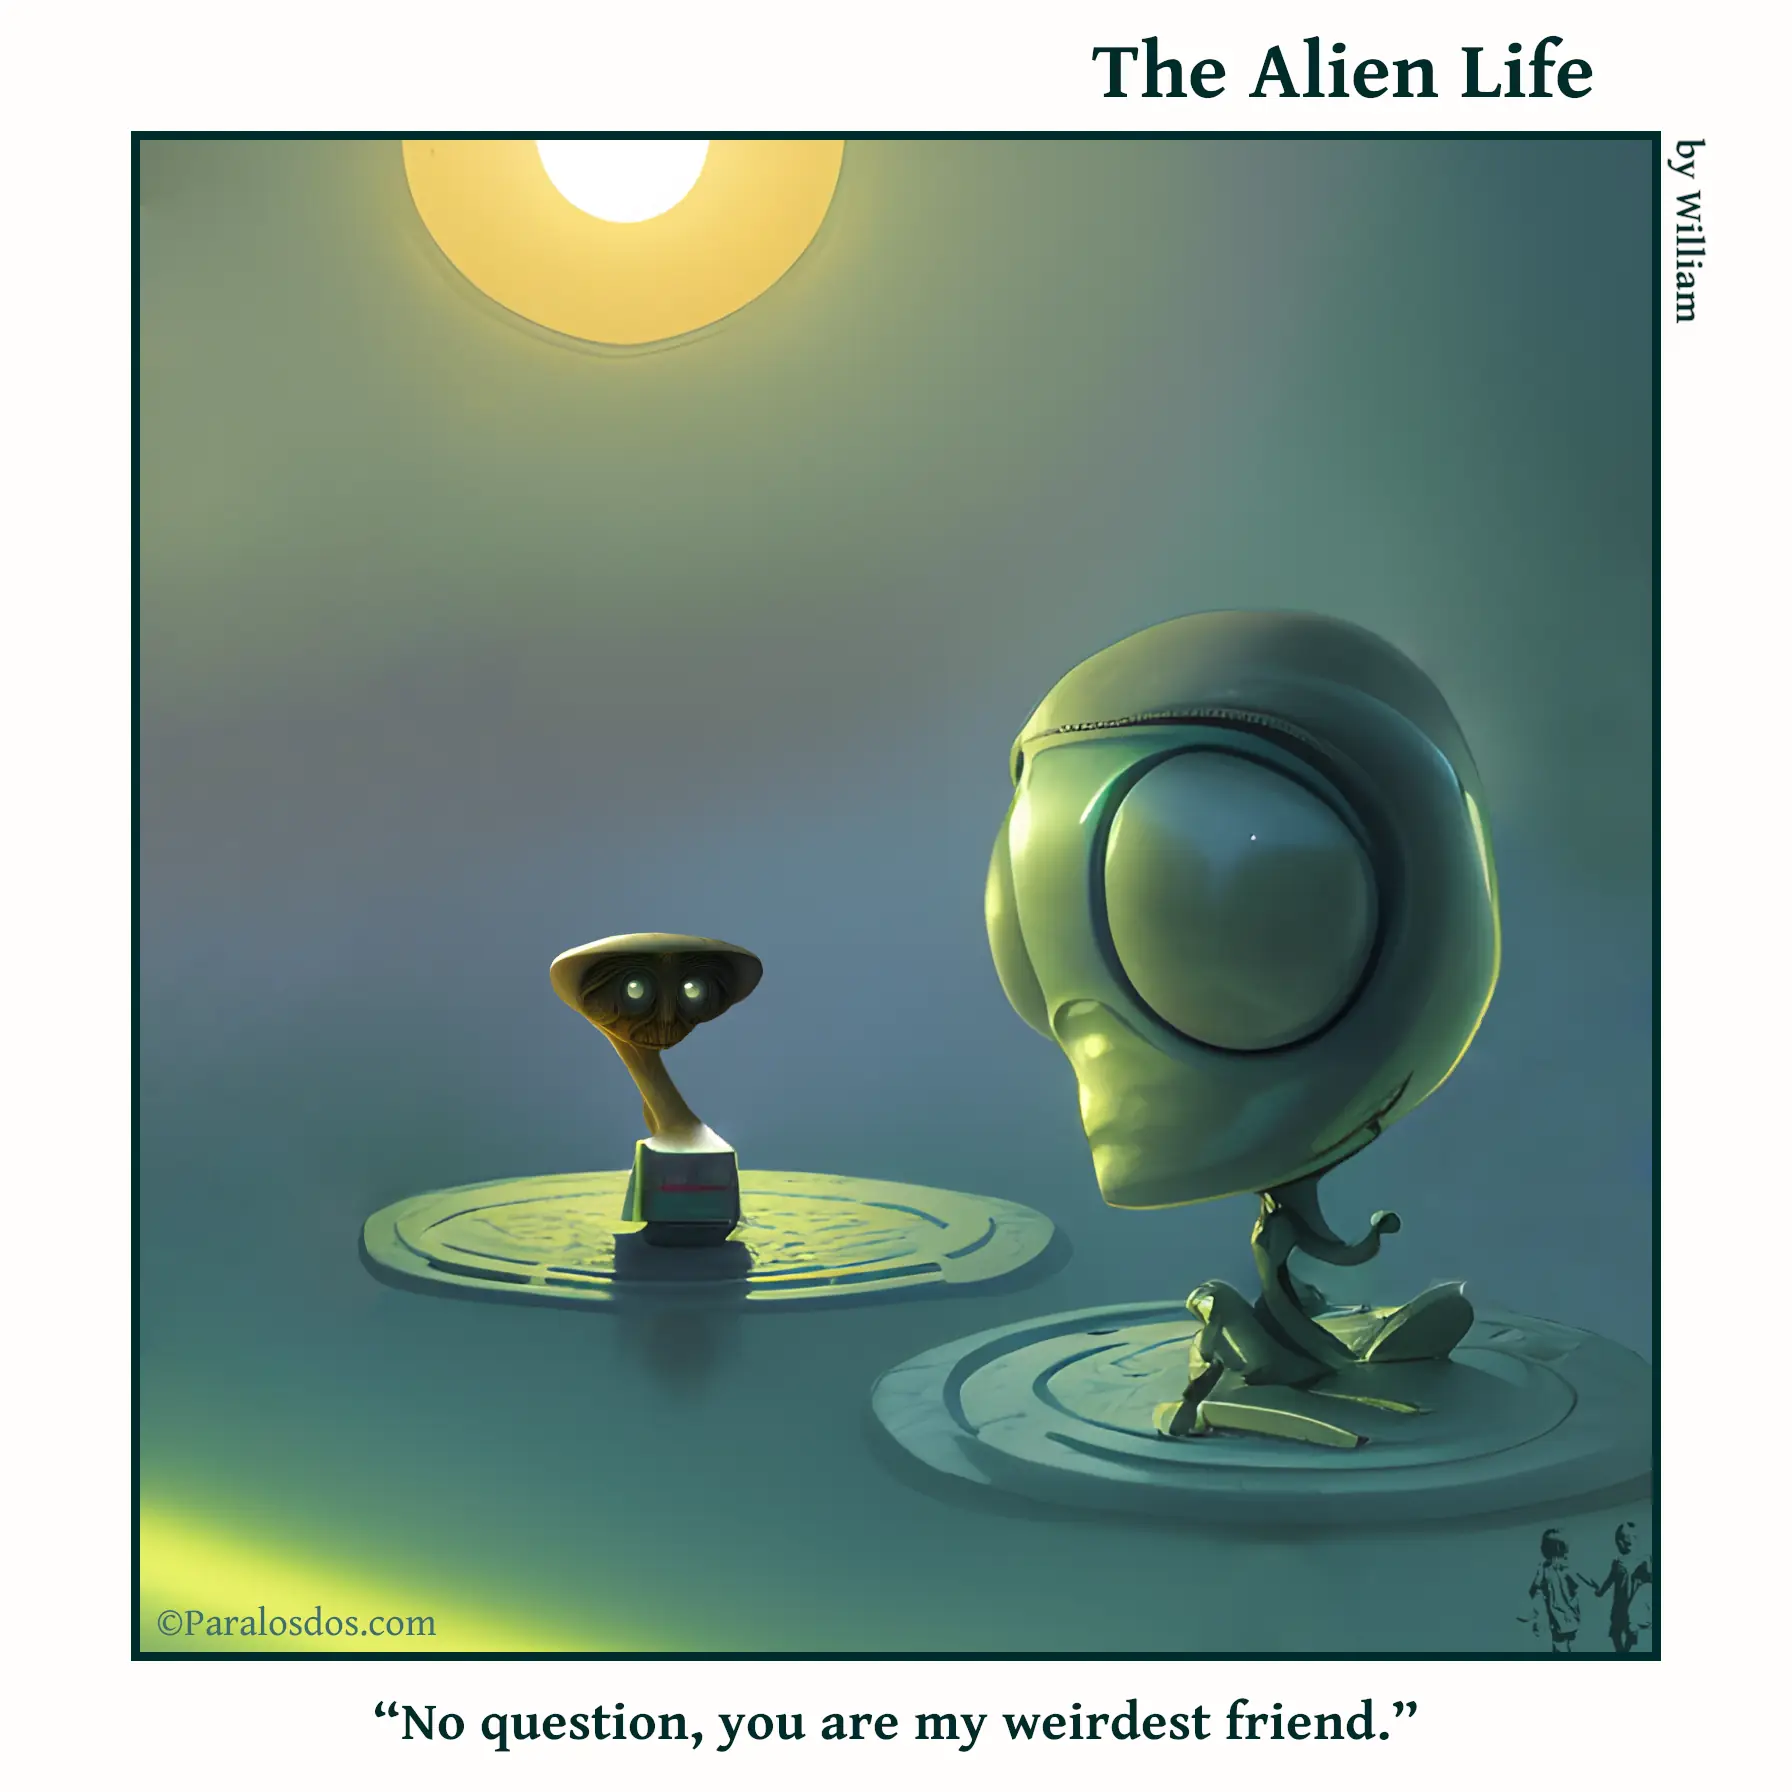 The Alien Life, one panel Comic. Two really weird looking aliens are hanging out. The caption reads: “No question, you are my weirdest friend.”